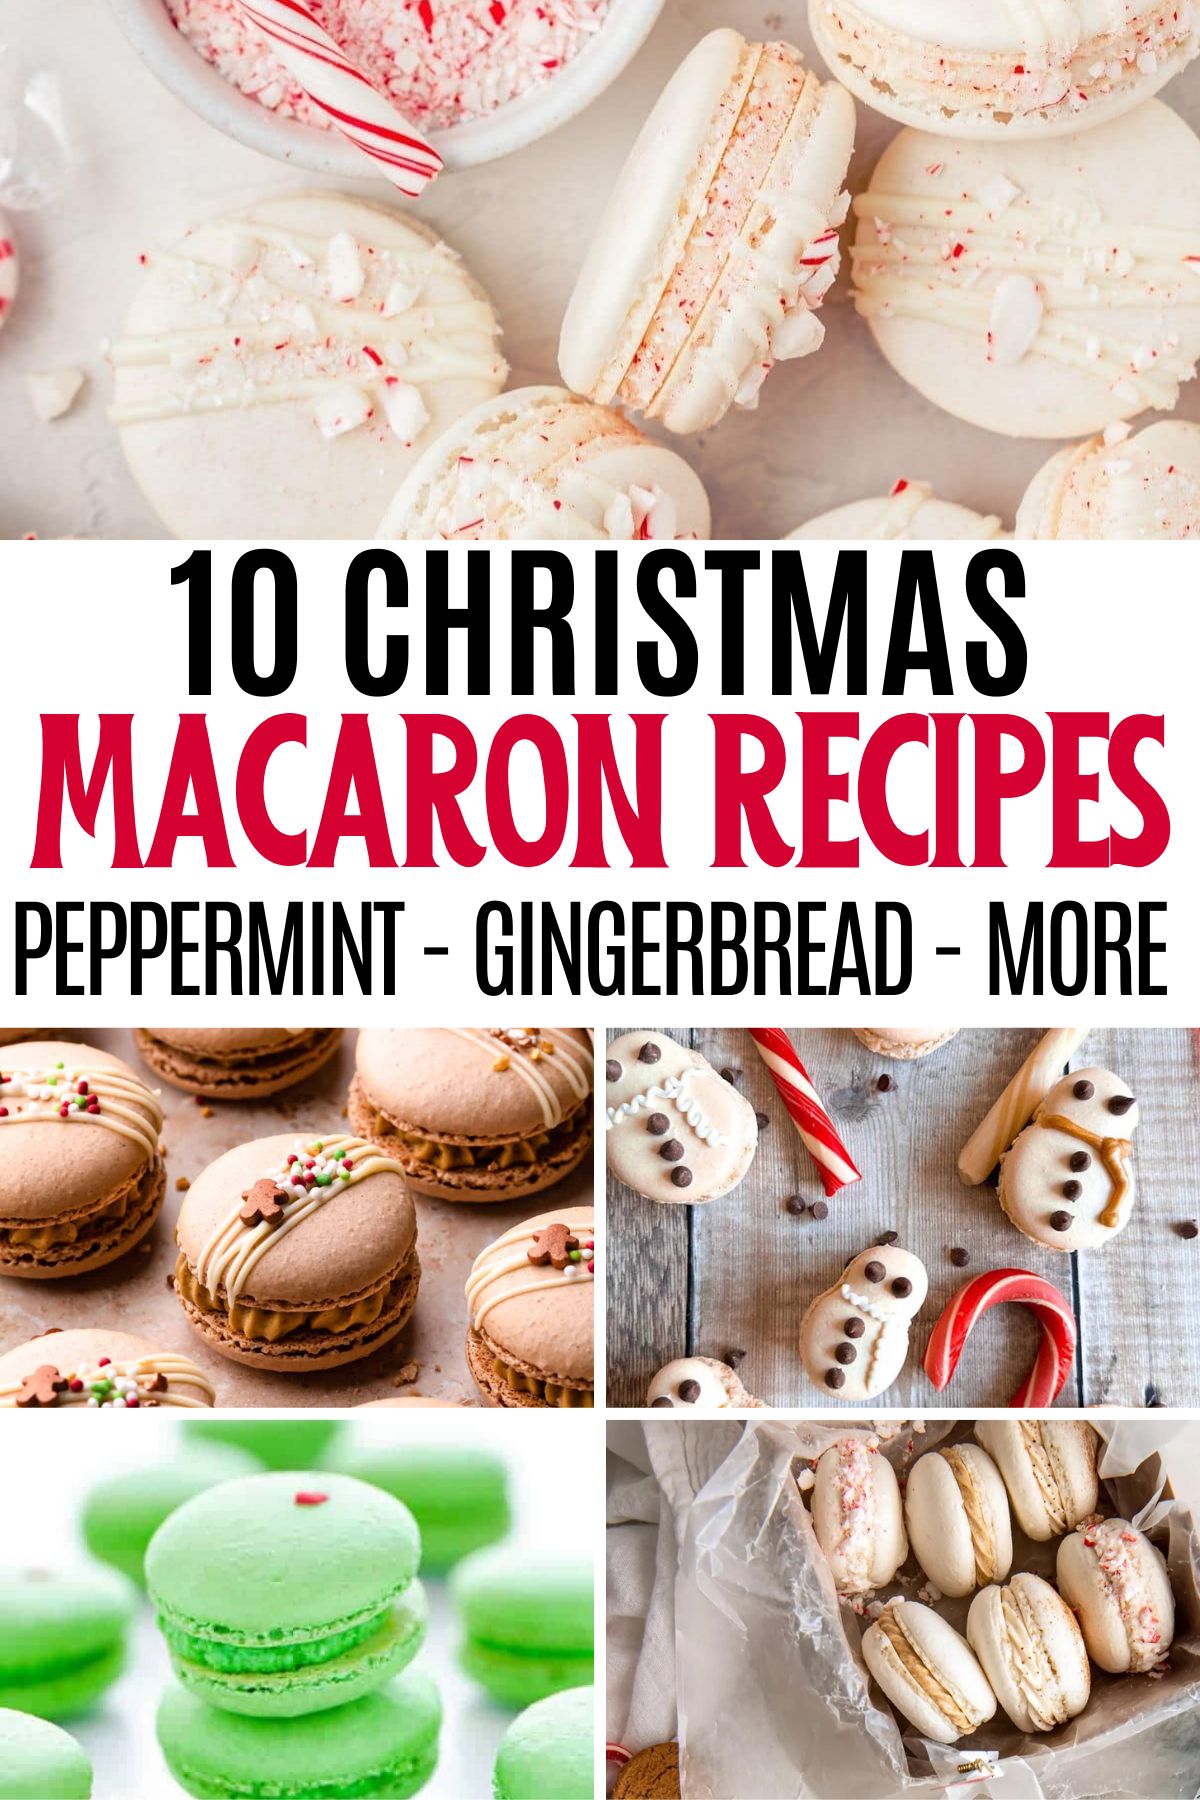 collage of Christmas macarons with text 10 christmas macaron recipes, peppermint, gingerbread, and more